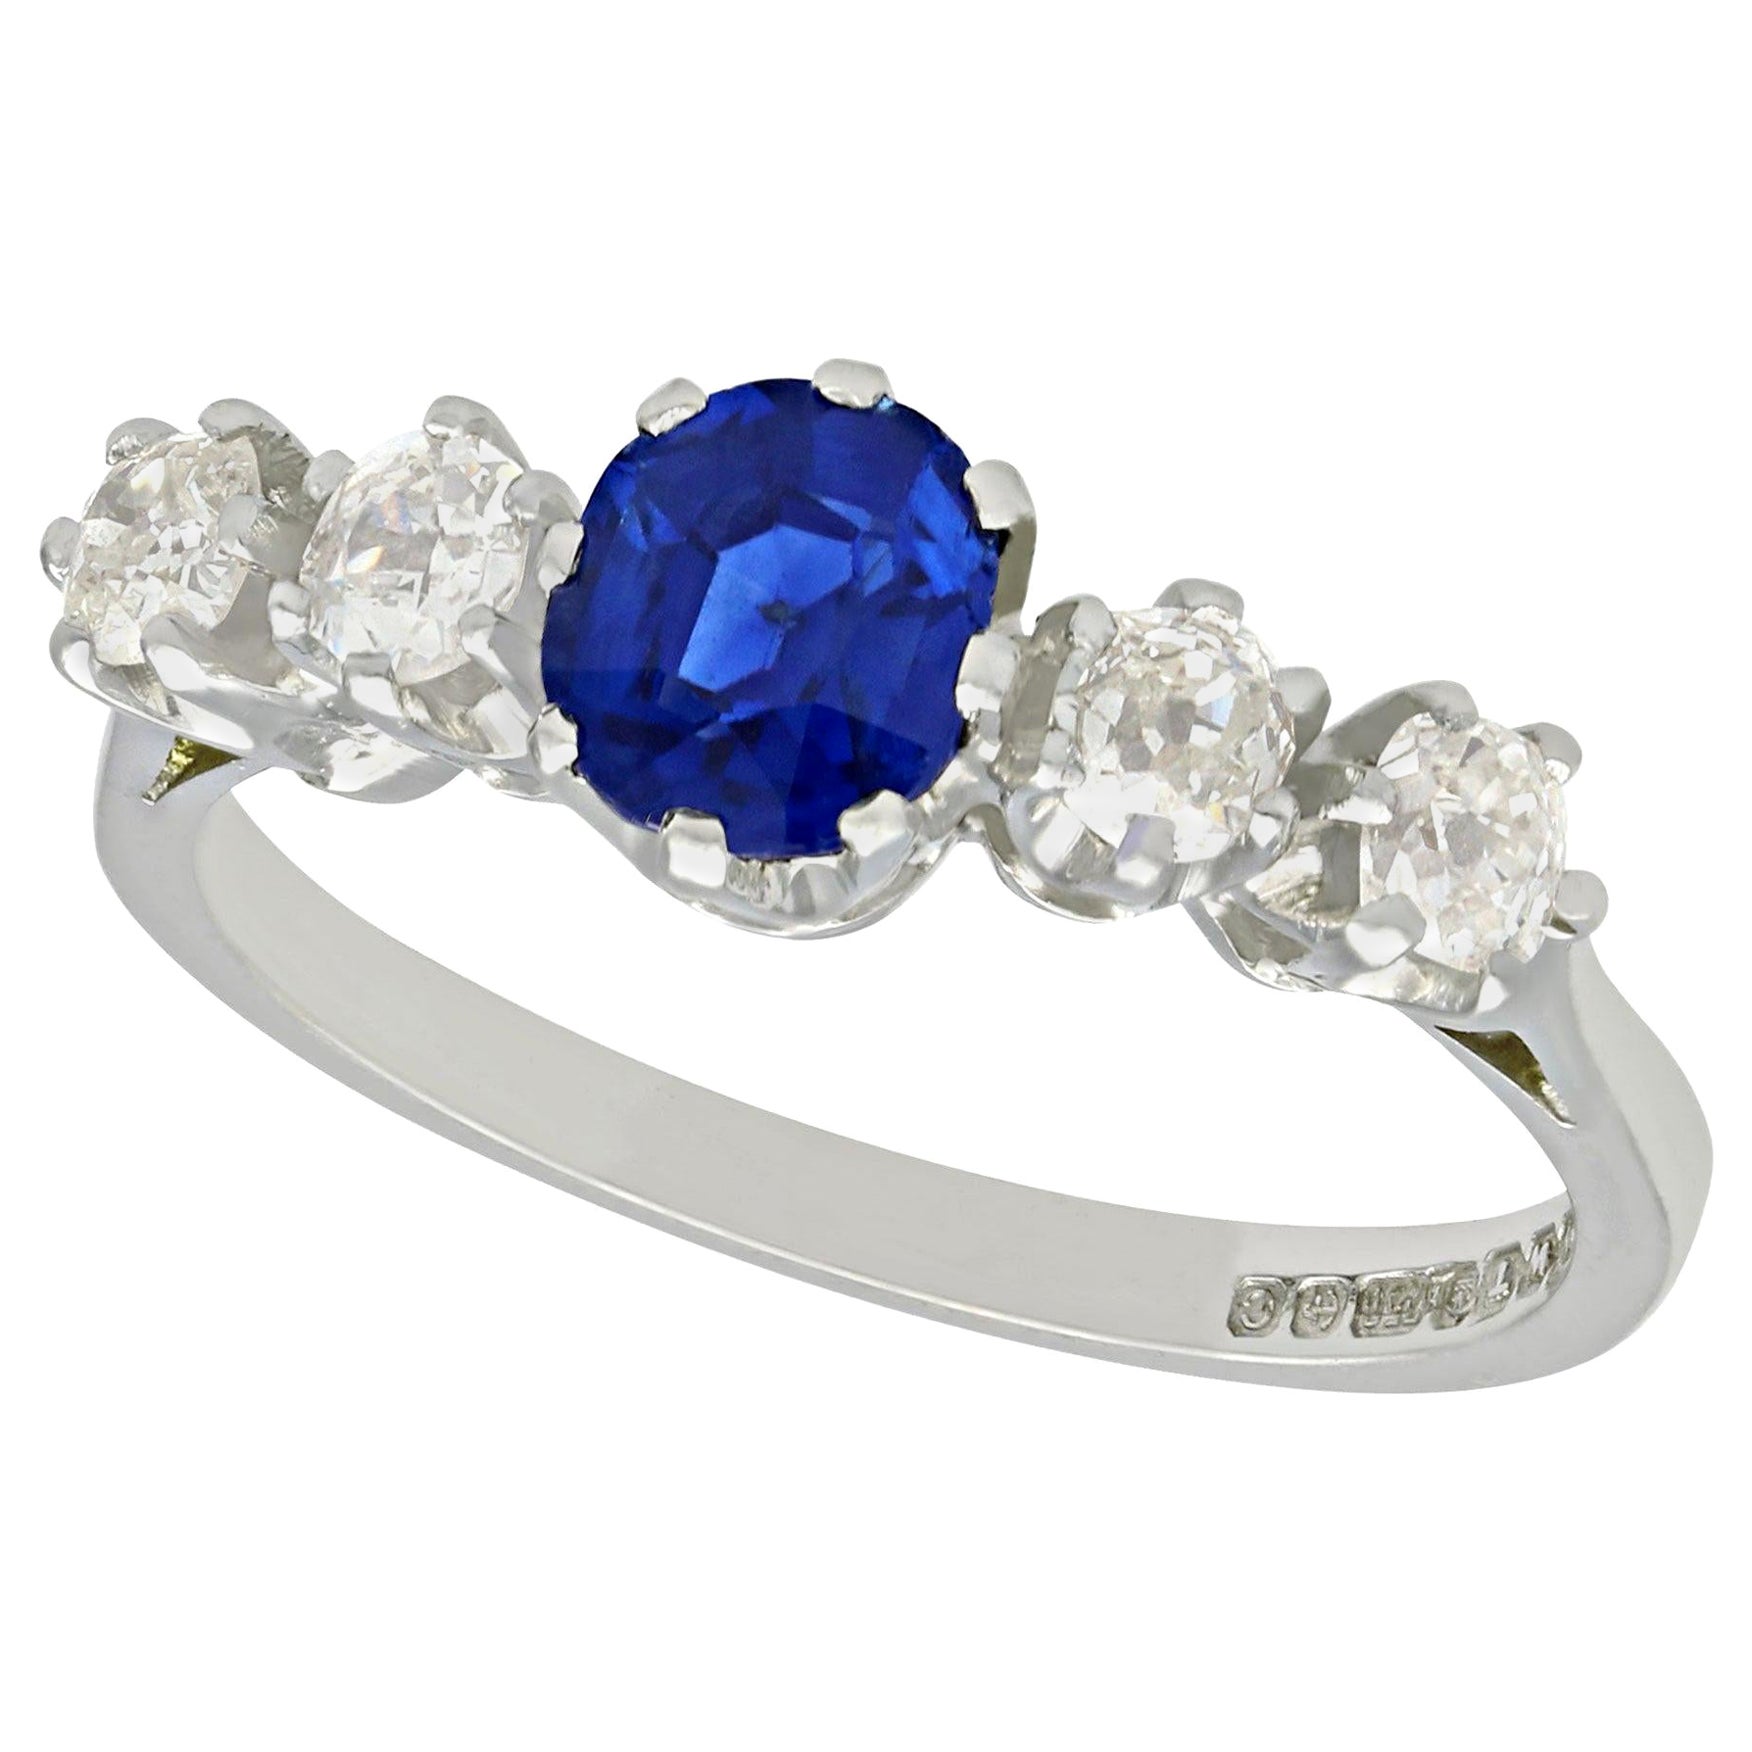 AGL Certified 1.19 Carat Sapphire and Diamond White Gold Engagement Ring